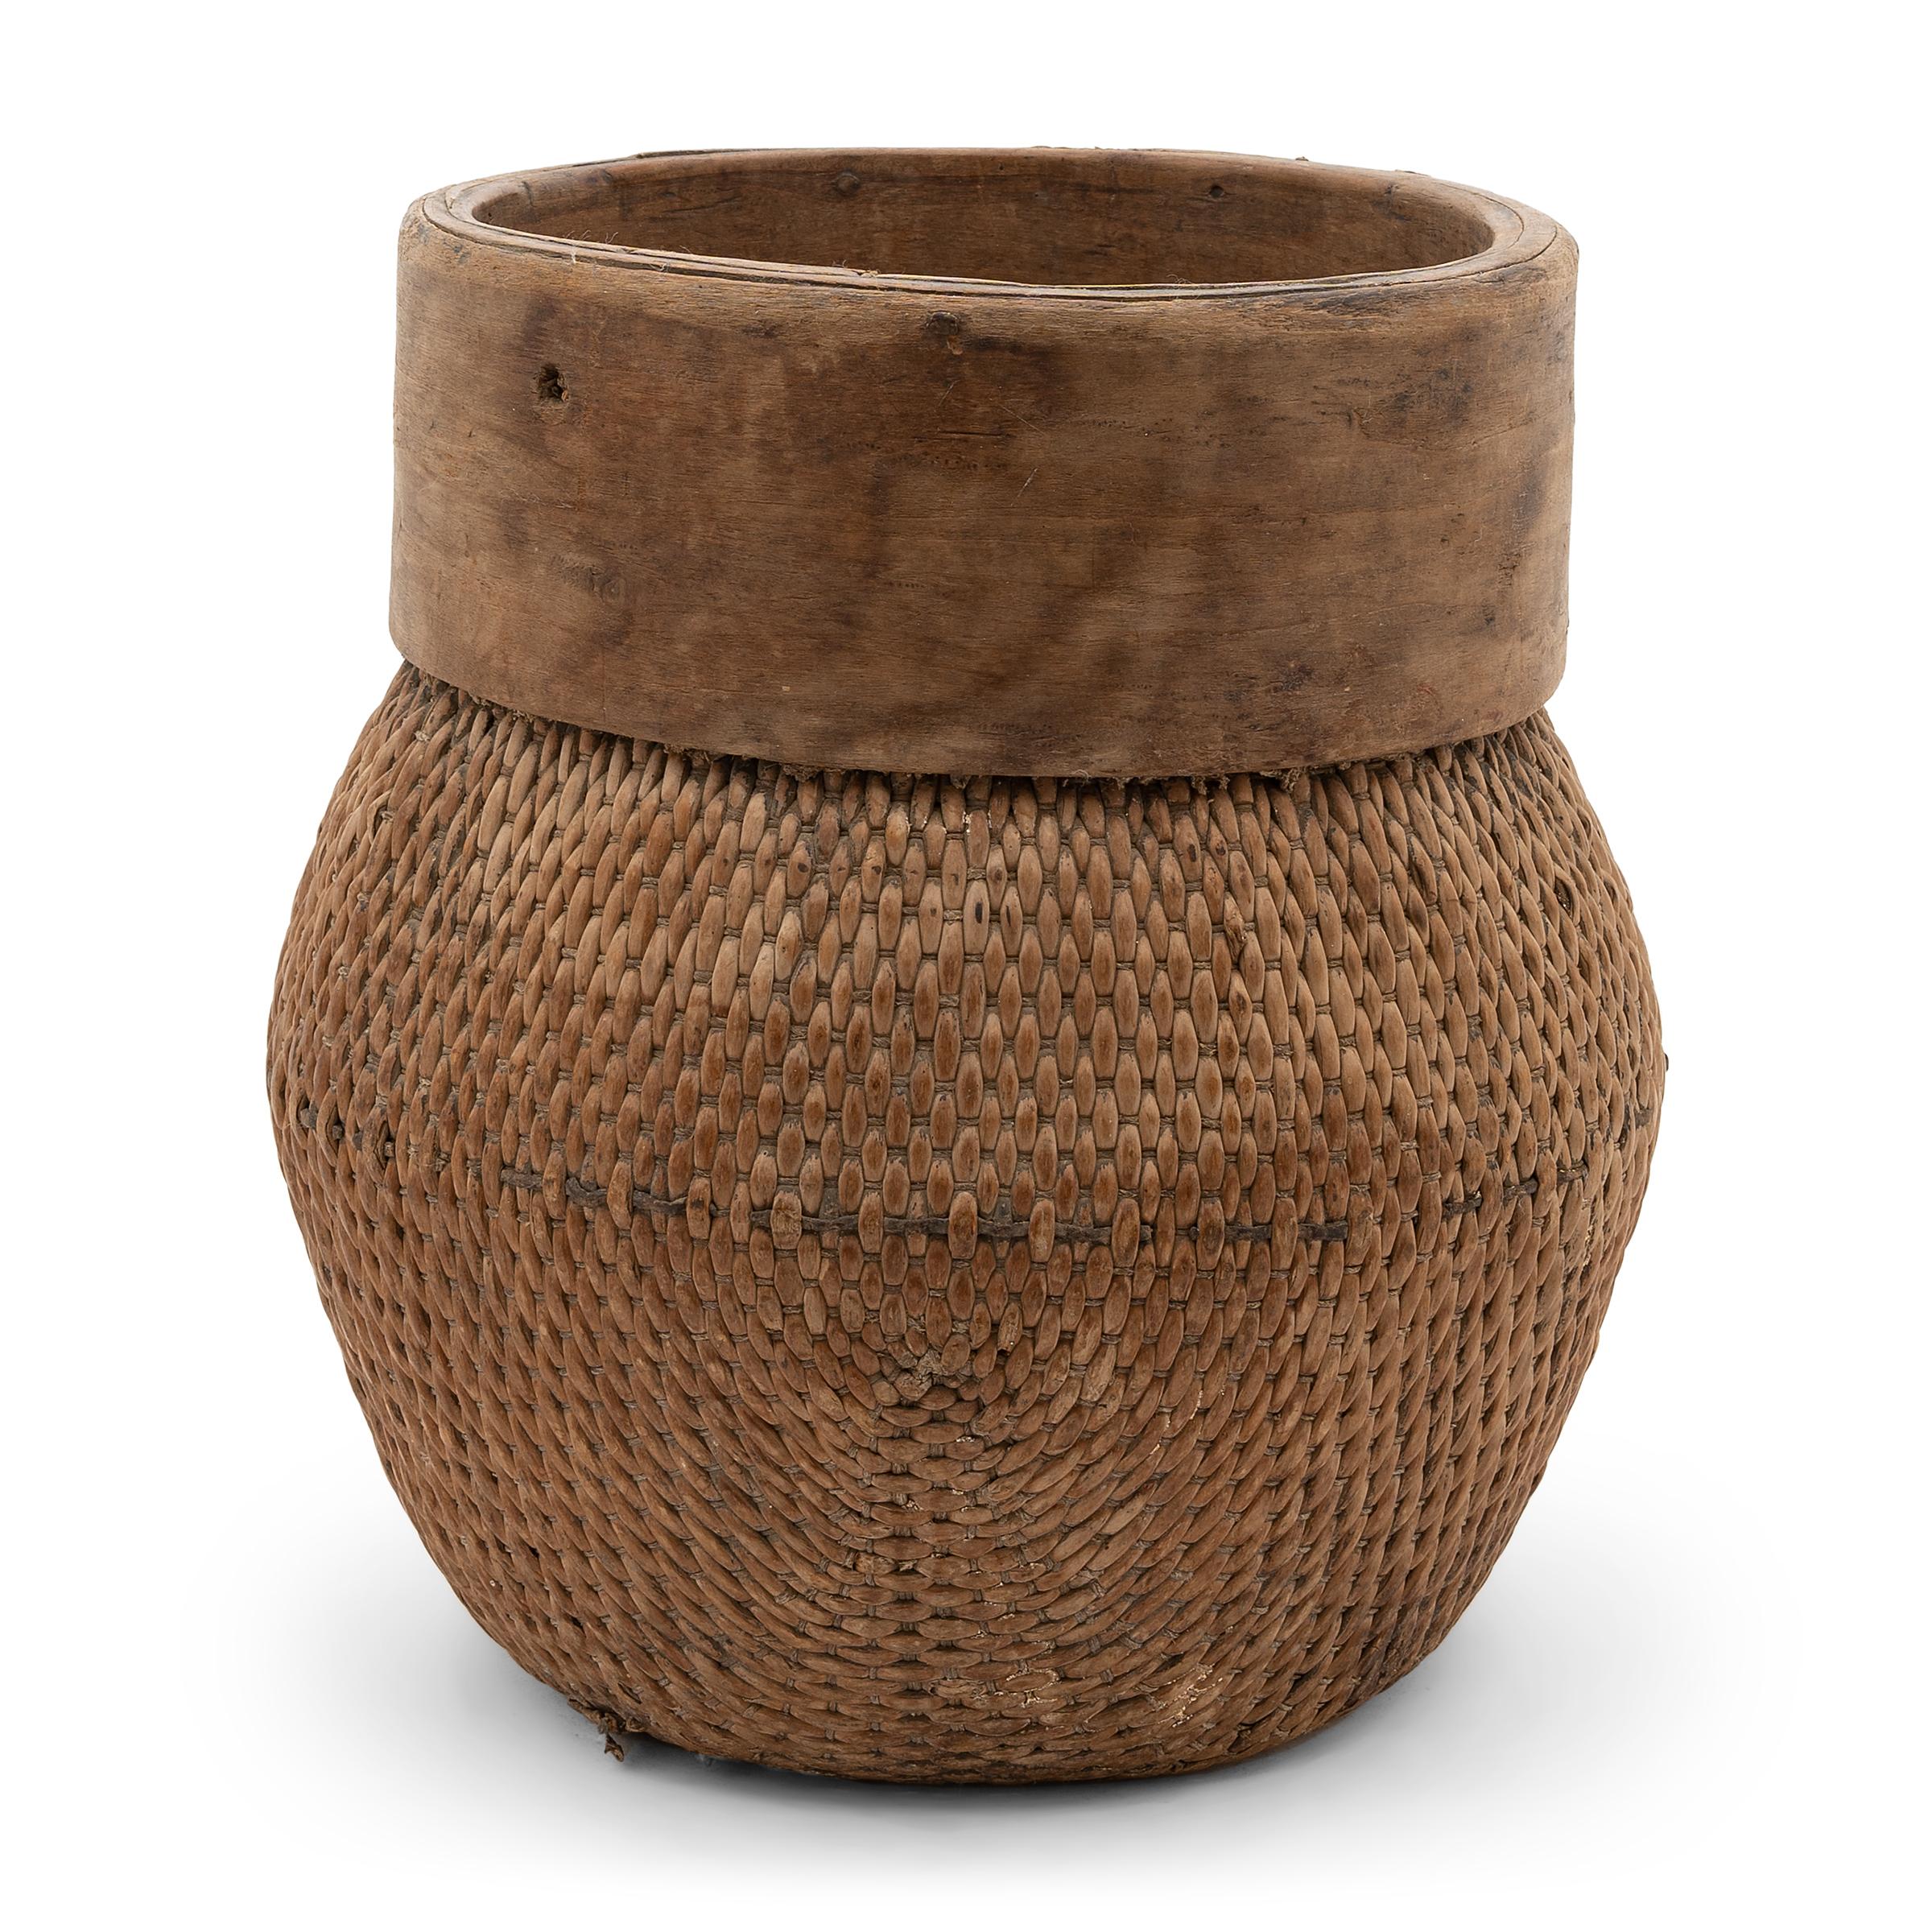 Centuries ago, a woven reed fisherman’s basket such as this would have been common in rural China as an everyday item, used until it became worn through. This particular example remains in beautiful condition, with a soft brown color and slightly